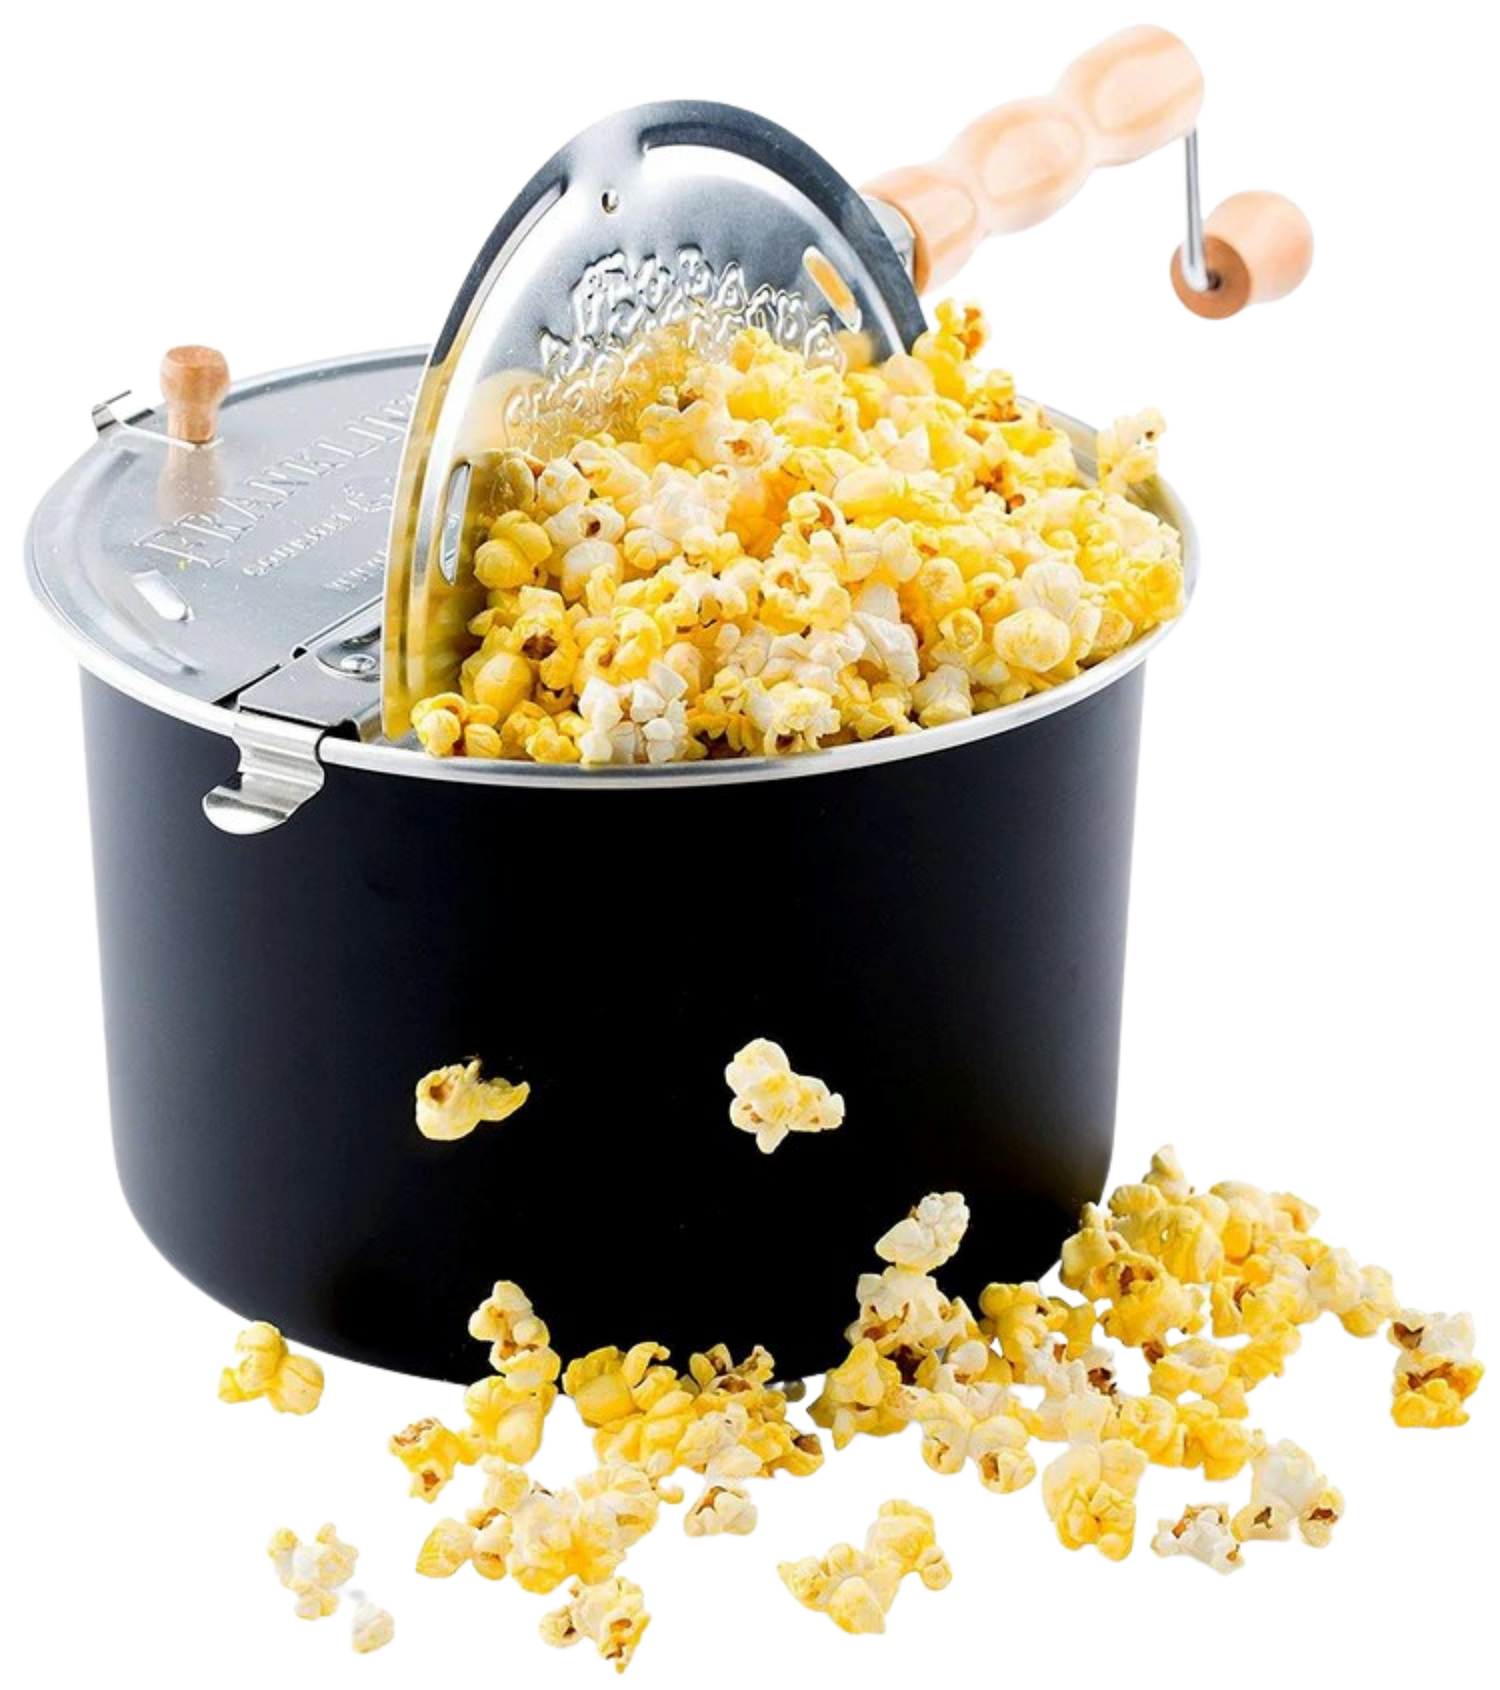 The Genuine Whirley Pop Perfect Popcorn Maker Popper Hand Manual Crank  Stovetop